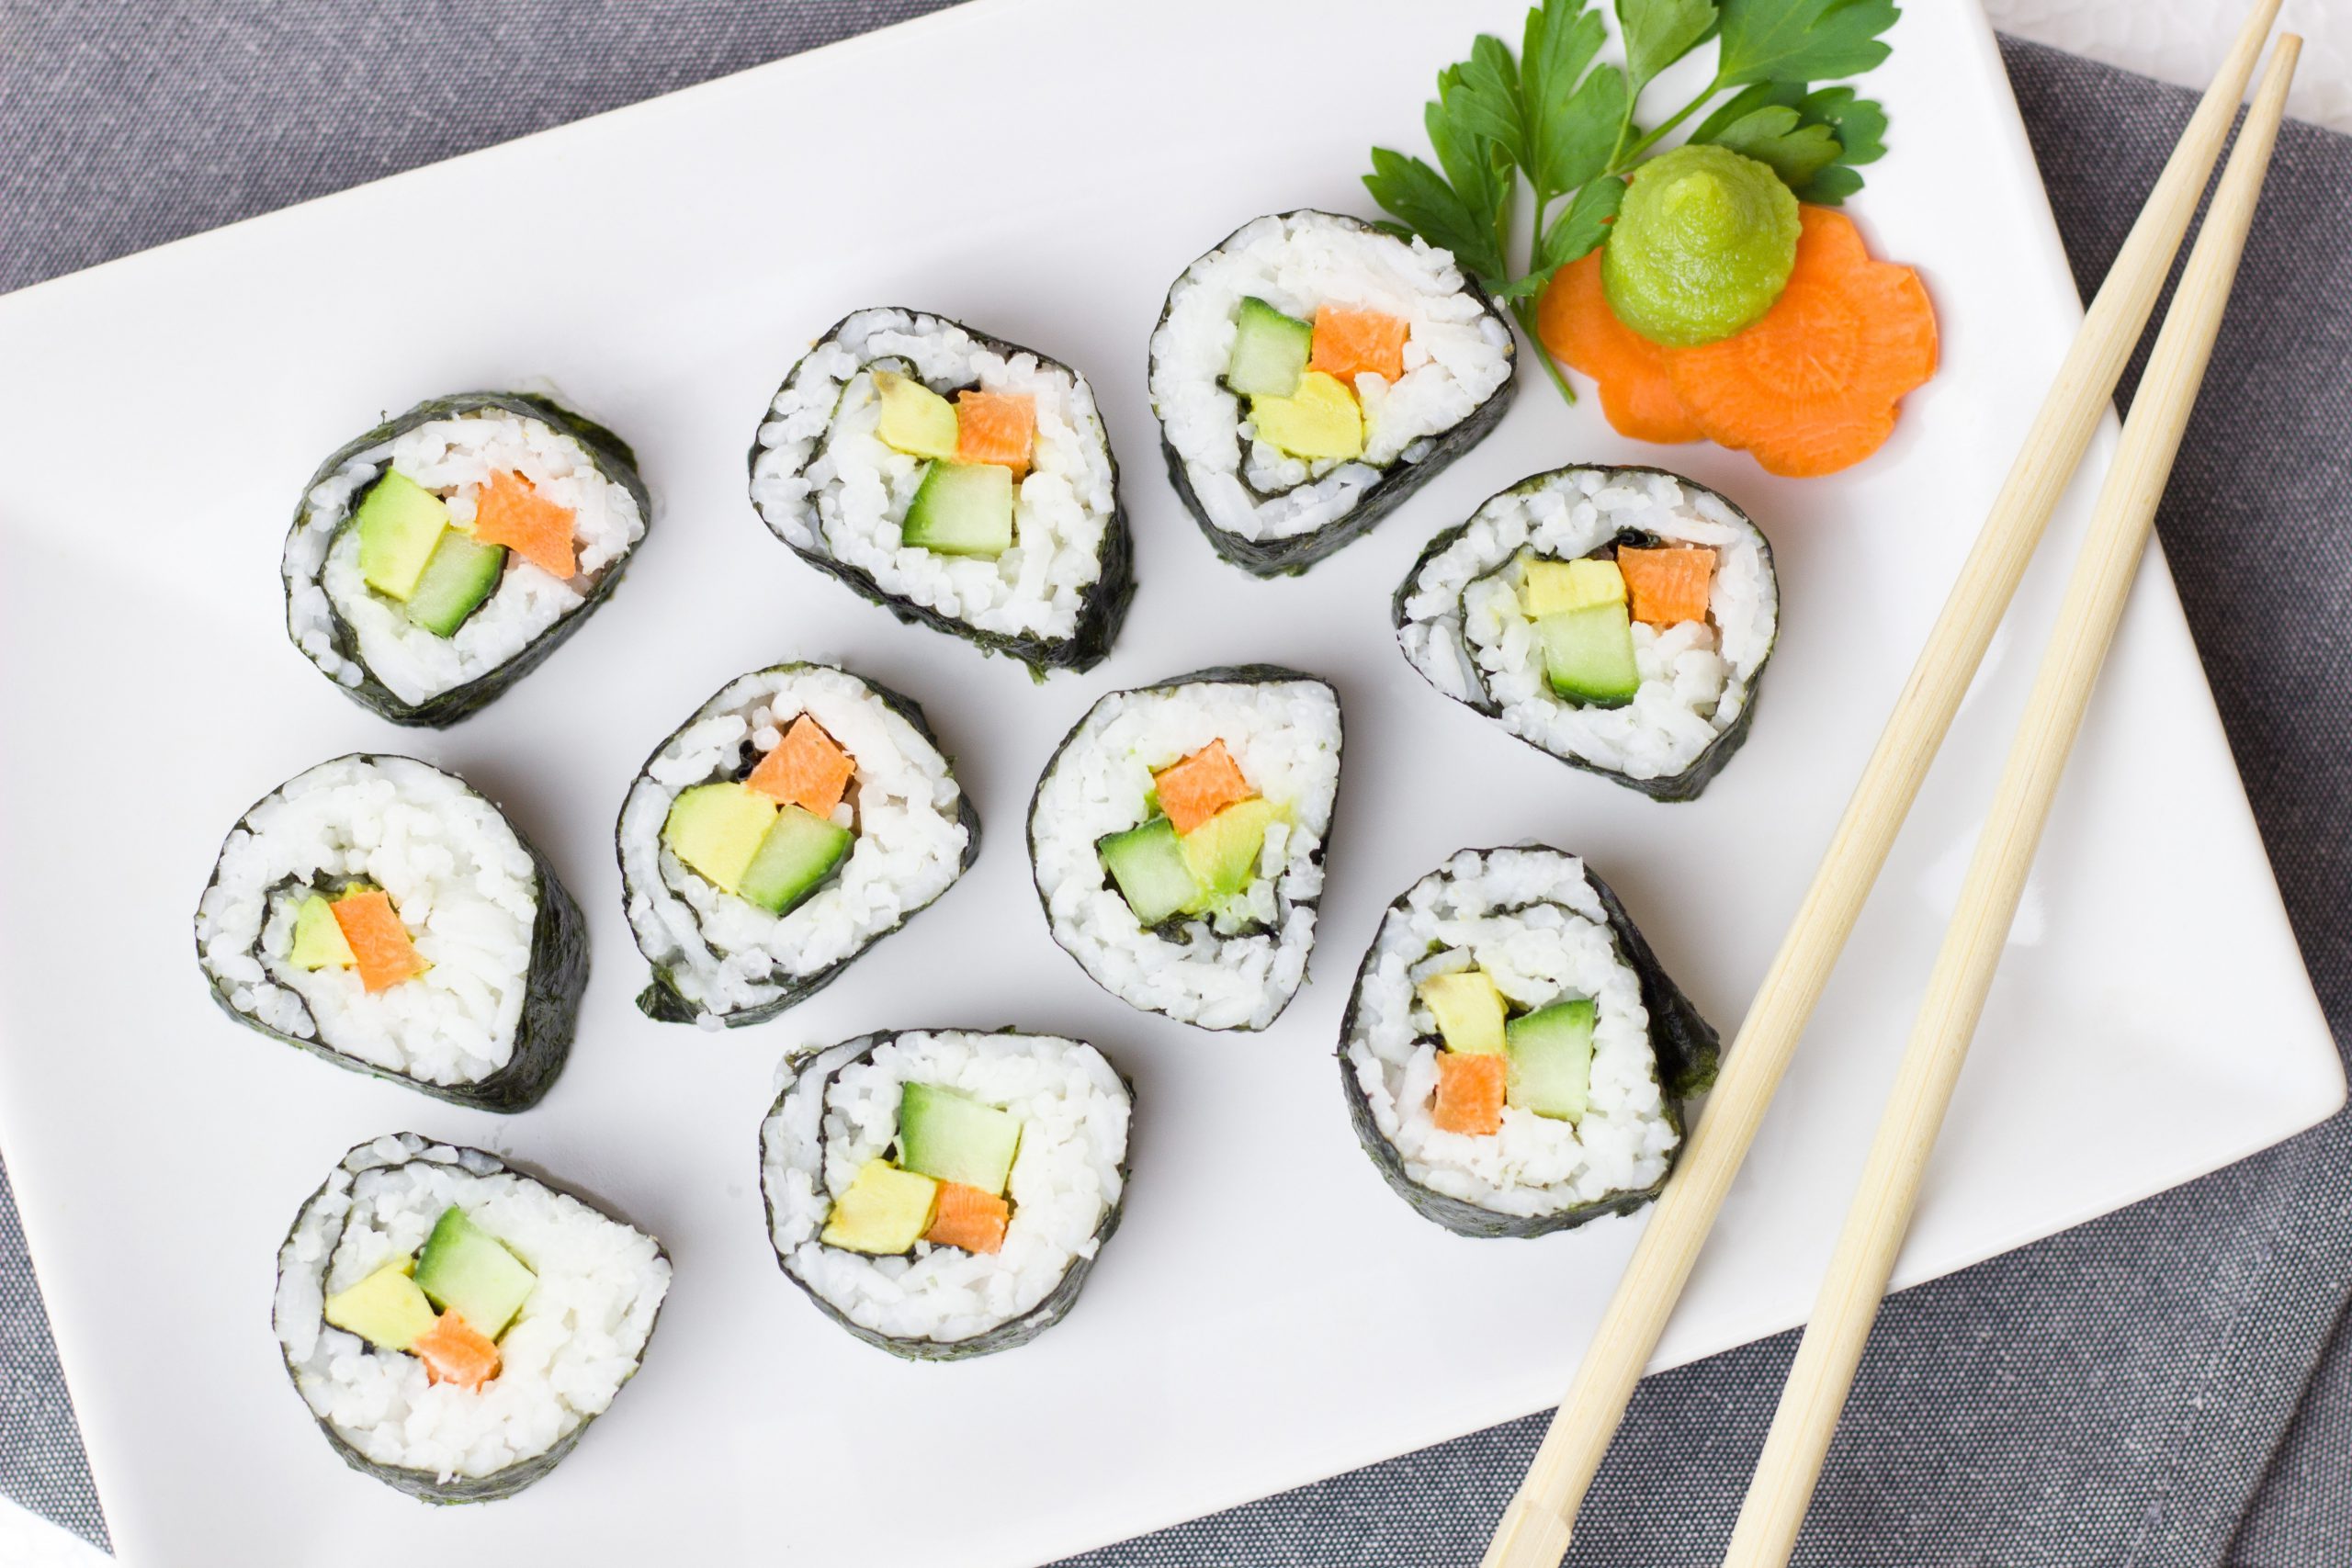 Step by Step: How to Make Sushi at Home